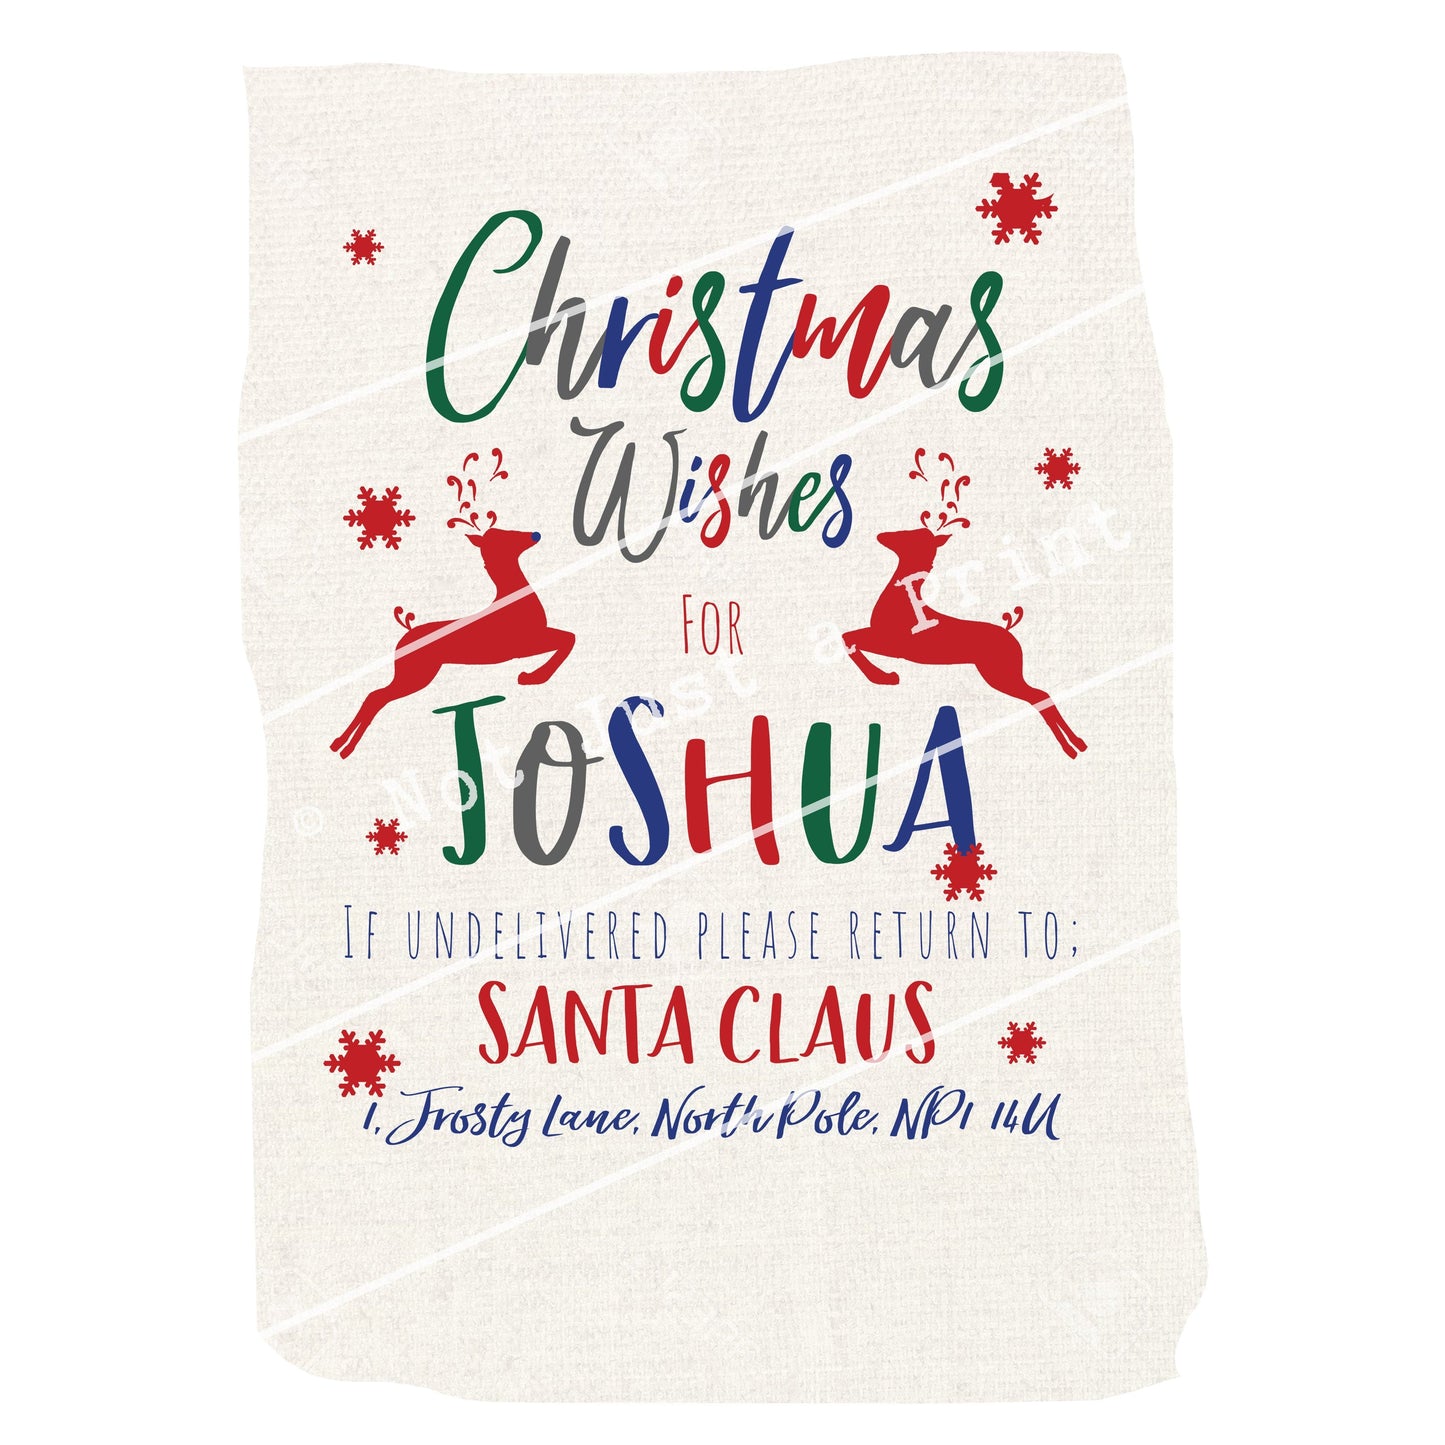 Customised Christmas Sack - Reindeer Themed With Mexicana Twist - Colourful Christmas Bag With Any Name